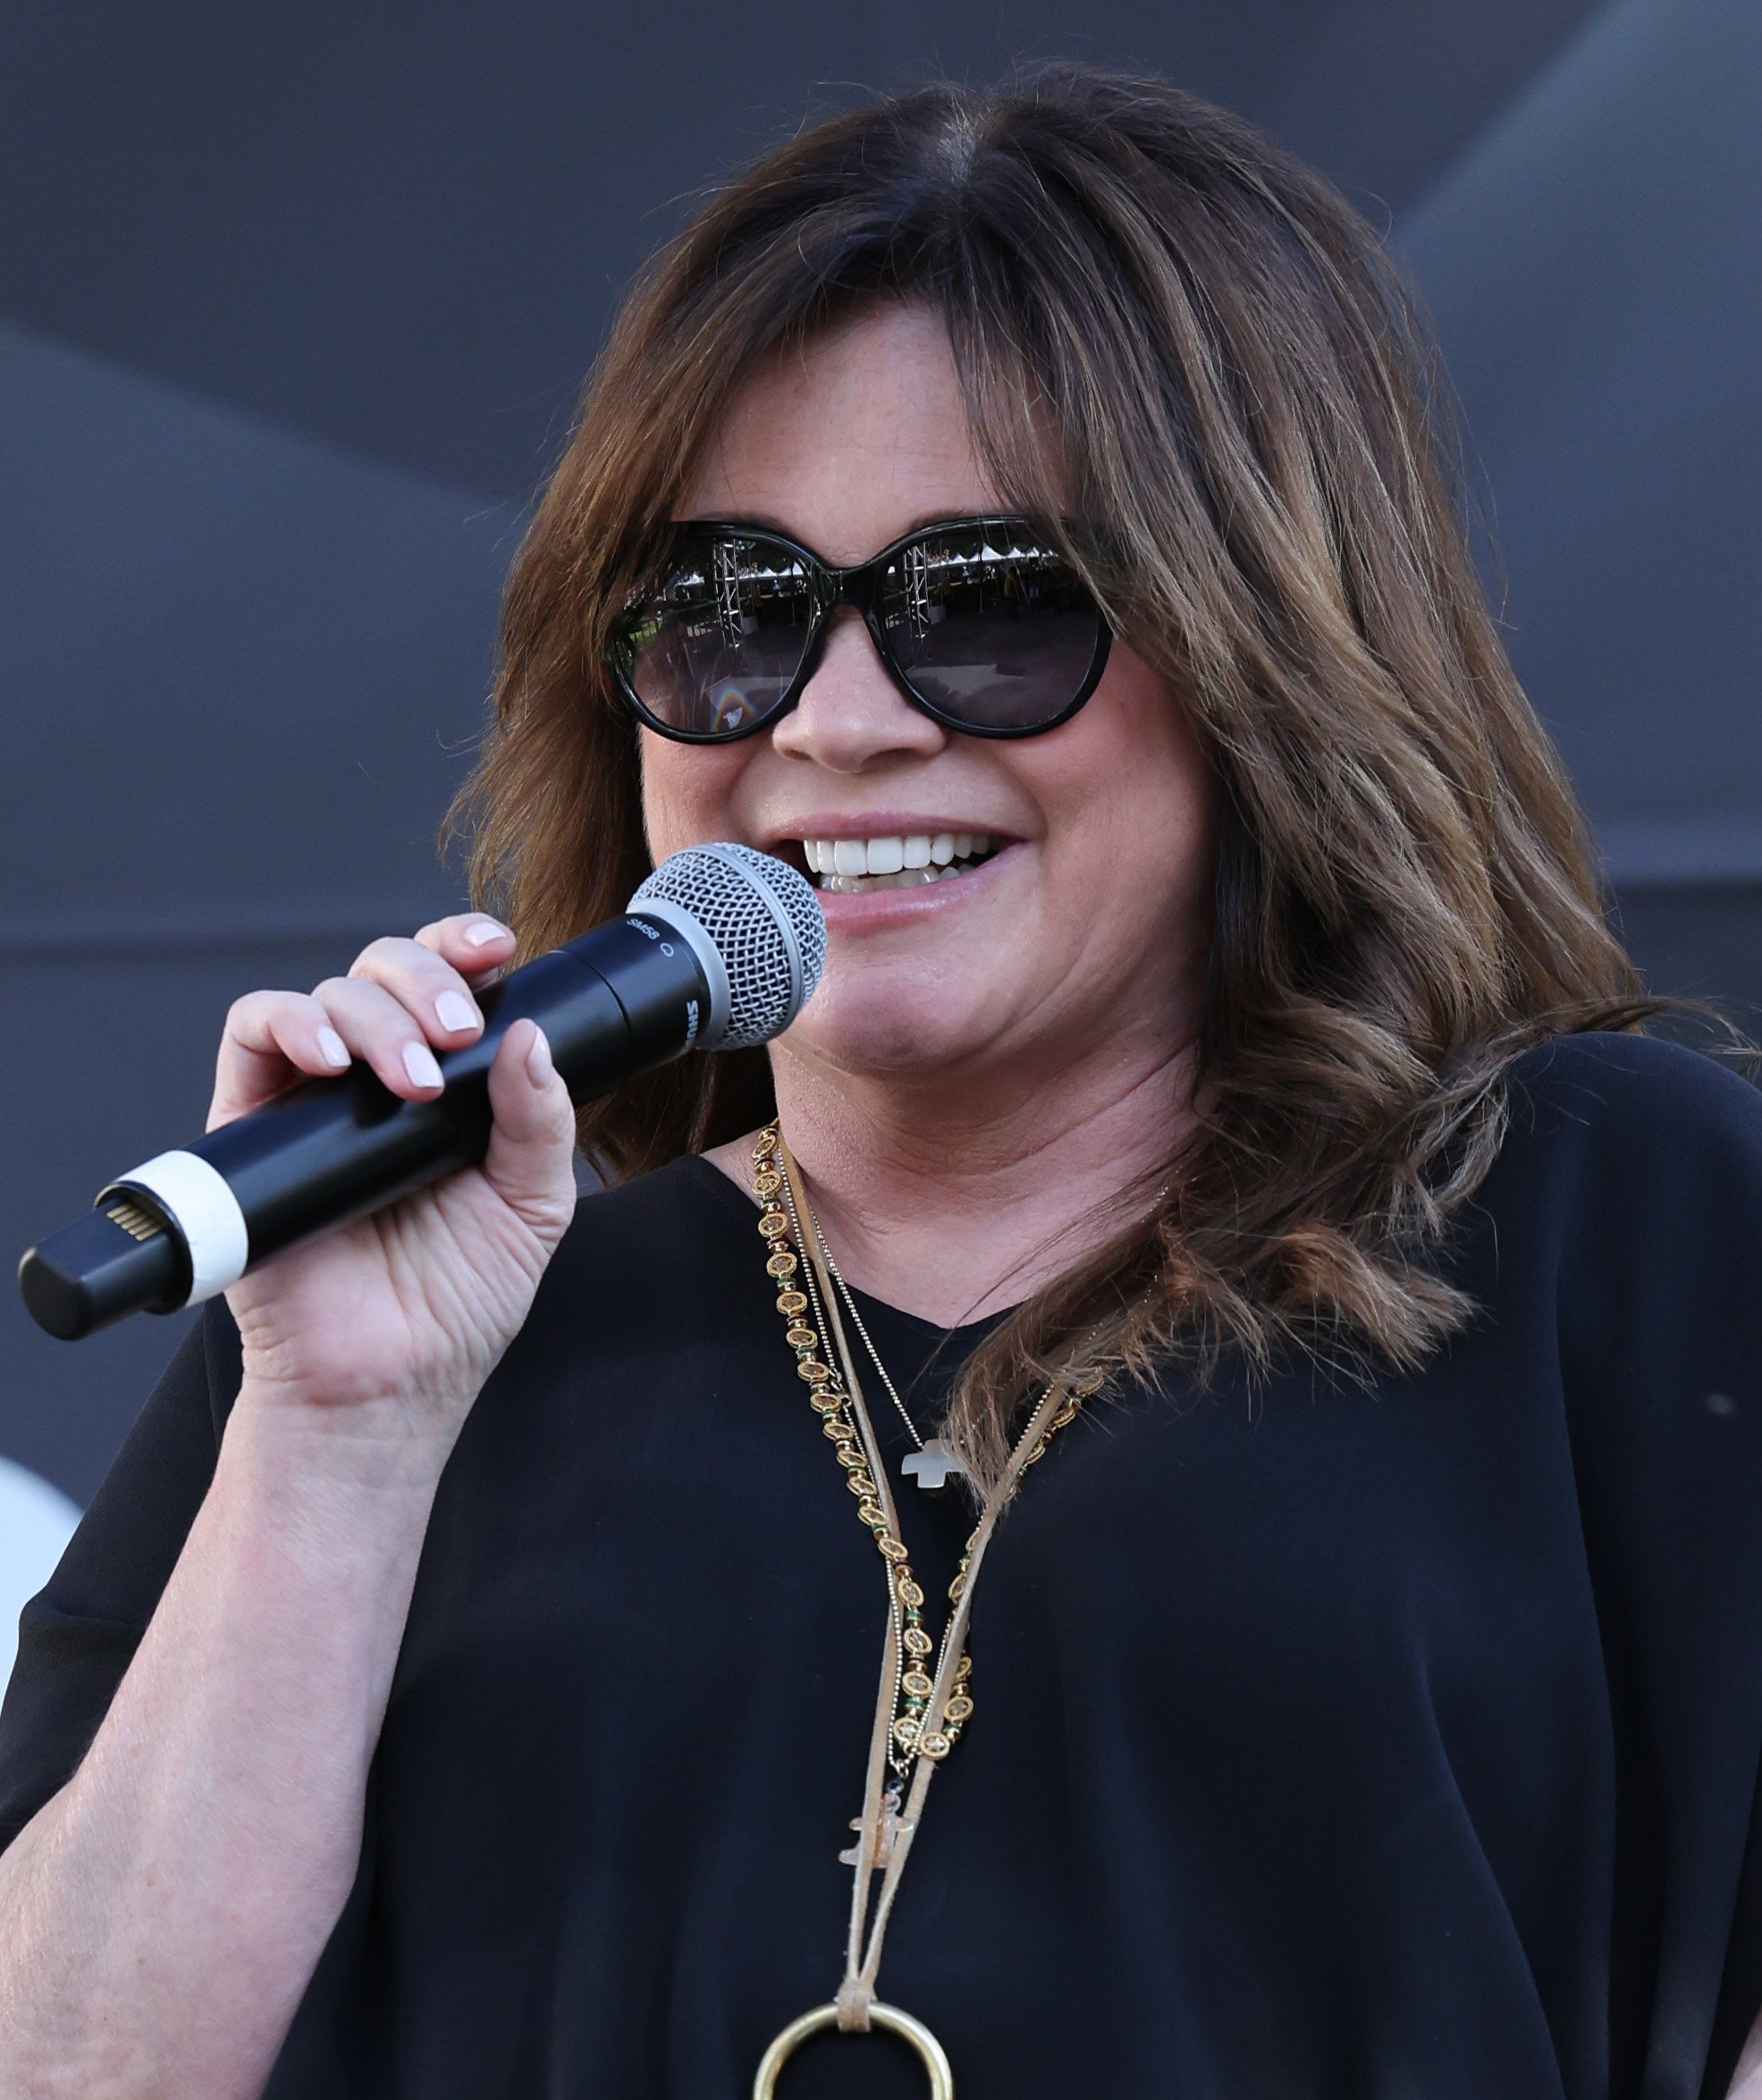 Valerie Bertinelli speaks on stage at the Los Angeles Times Festival of Books at the University of Southern California on April 23, 2022, in Los Angeles, California. | Source: Getty Images